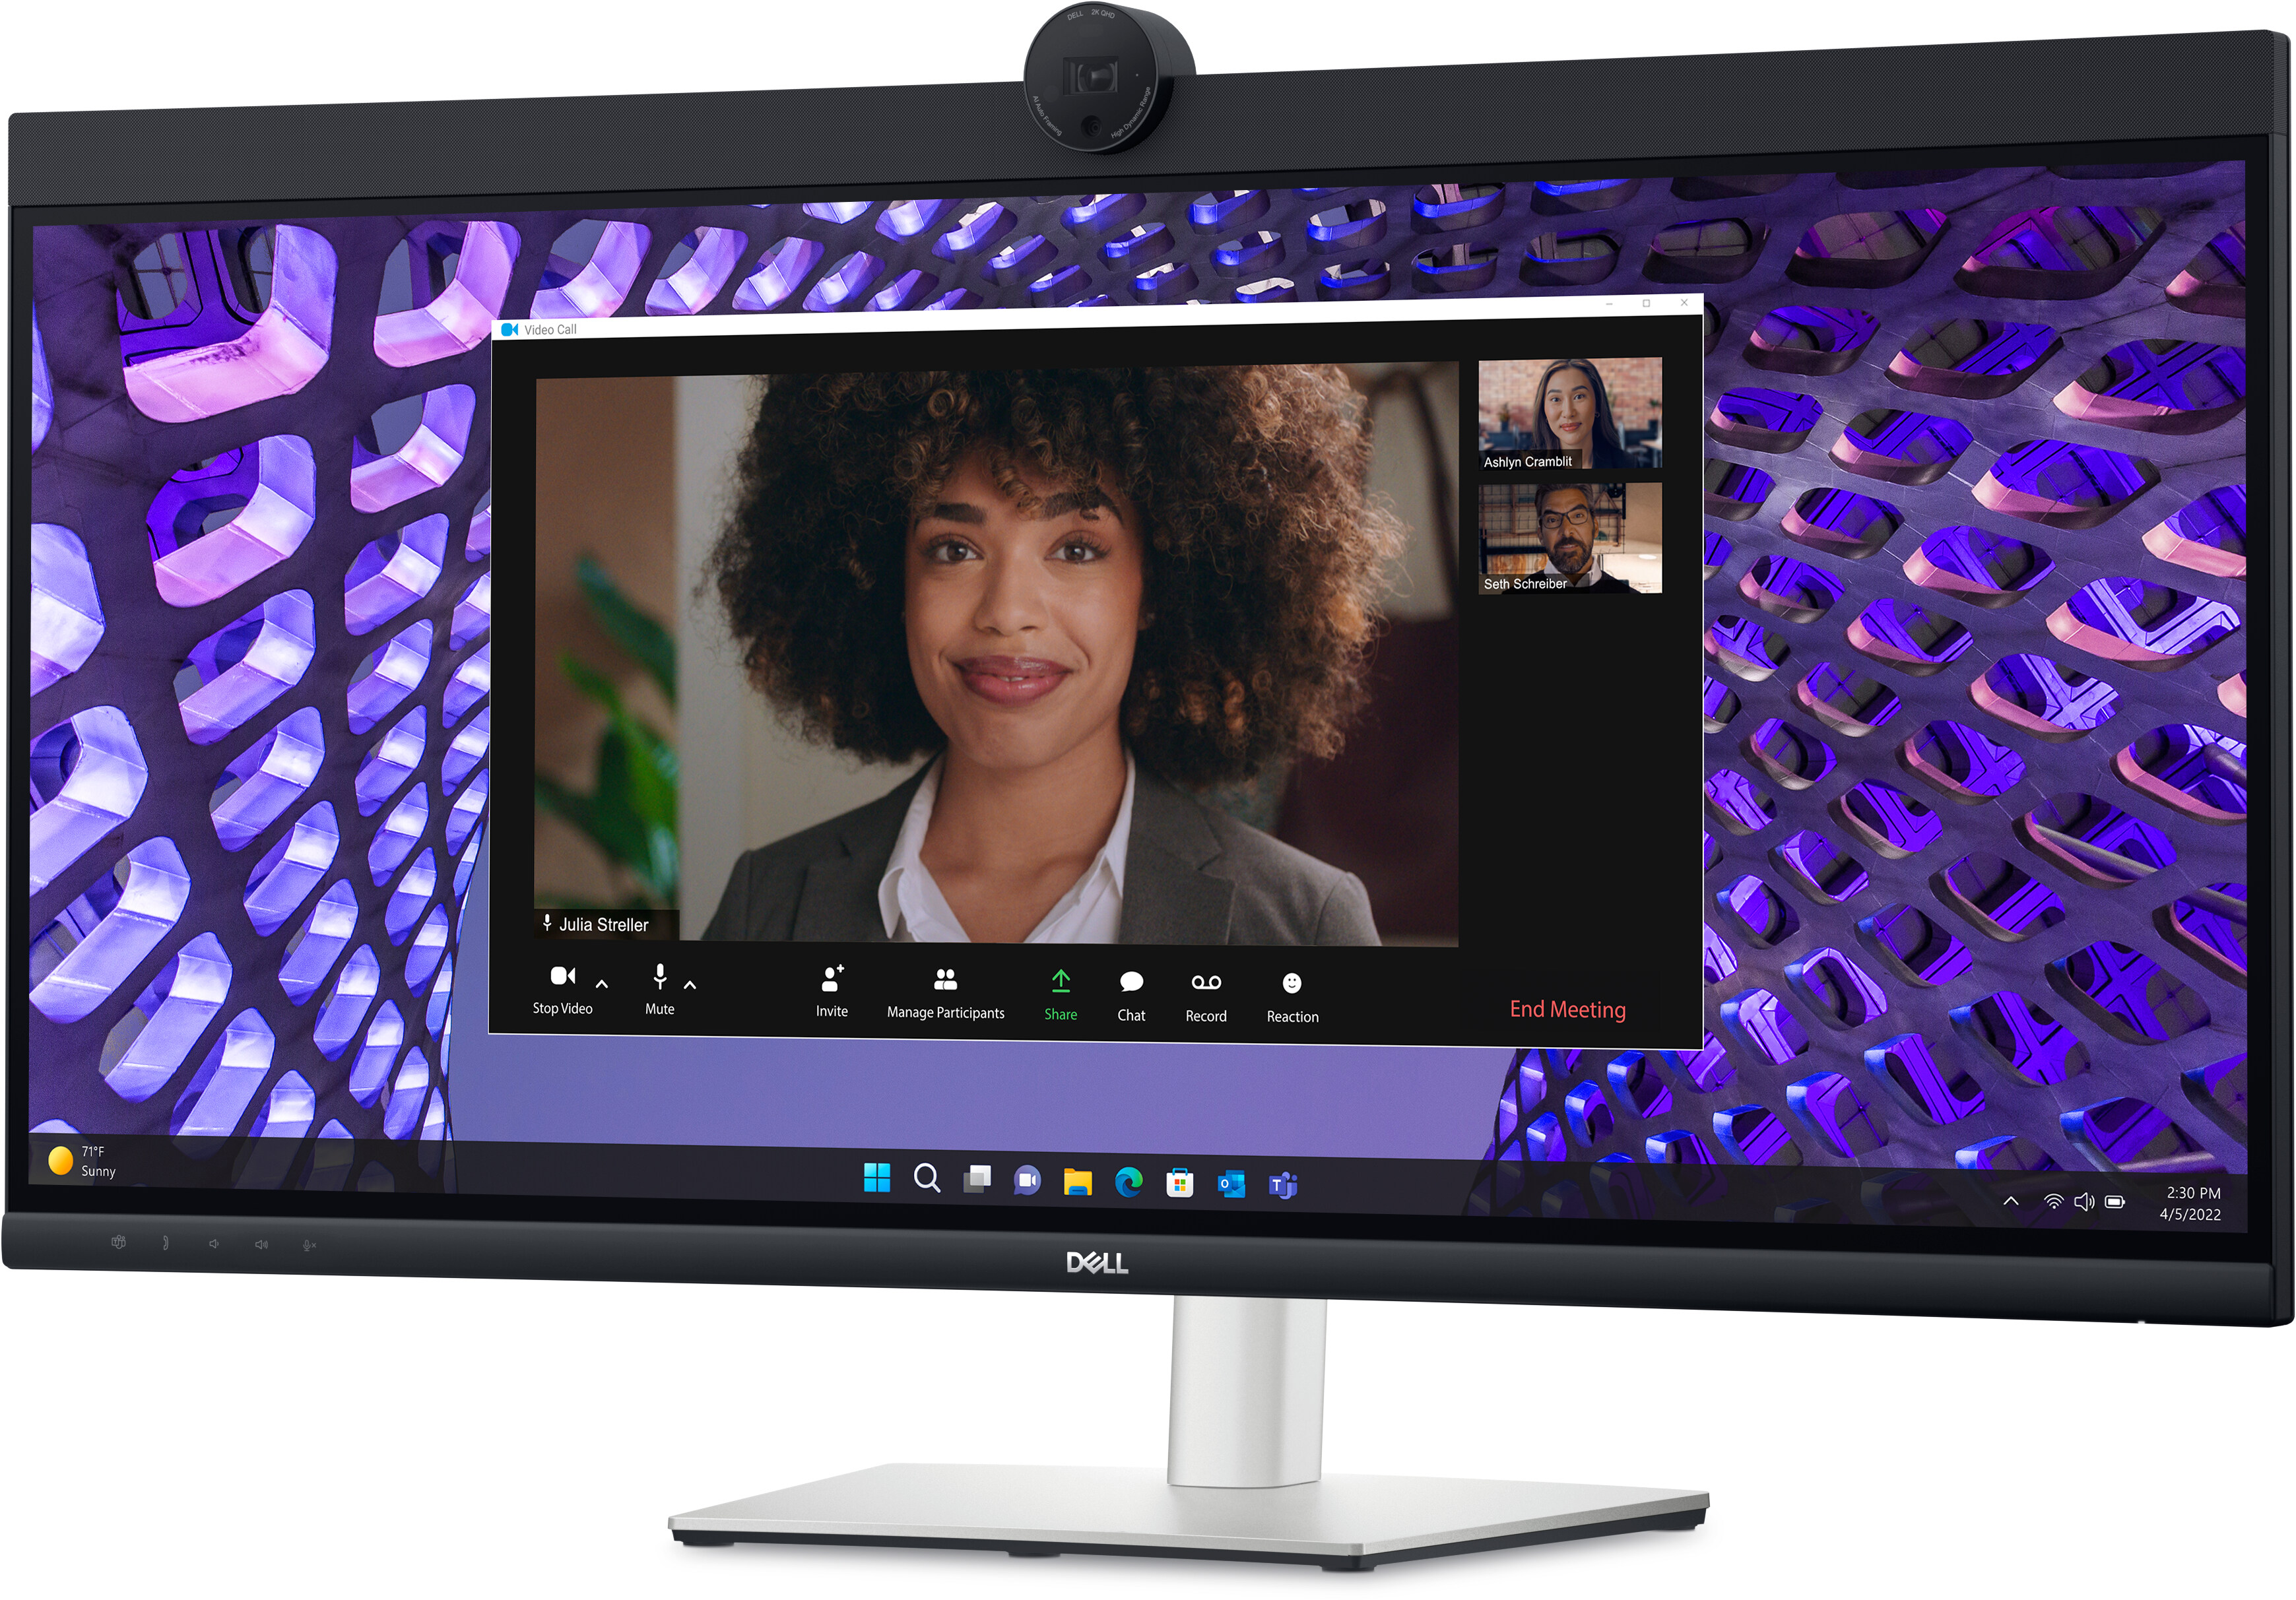 https://i.dell.com/is/image/DellContent/content/dam/ss2/product-images/dell-client-products/monitor/p-series/p3424web/media-gallery/monitor-p3424web-bk-gallery-2.psd?fmt=pjpg&pscan=auto&scl=1&wid=3479&hei=2425&qlt=100,1&resMode=sharp2&size=3479,2425&chrss=full&imwidth=5000